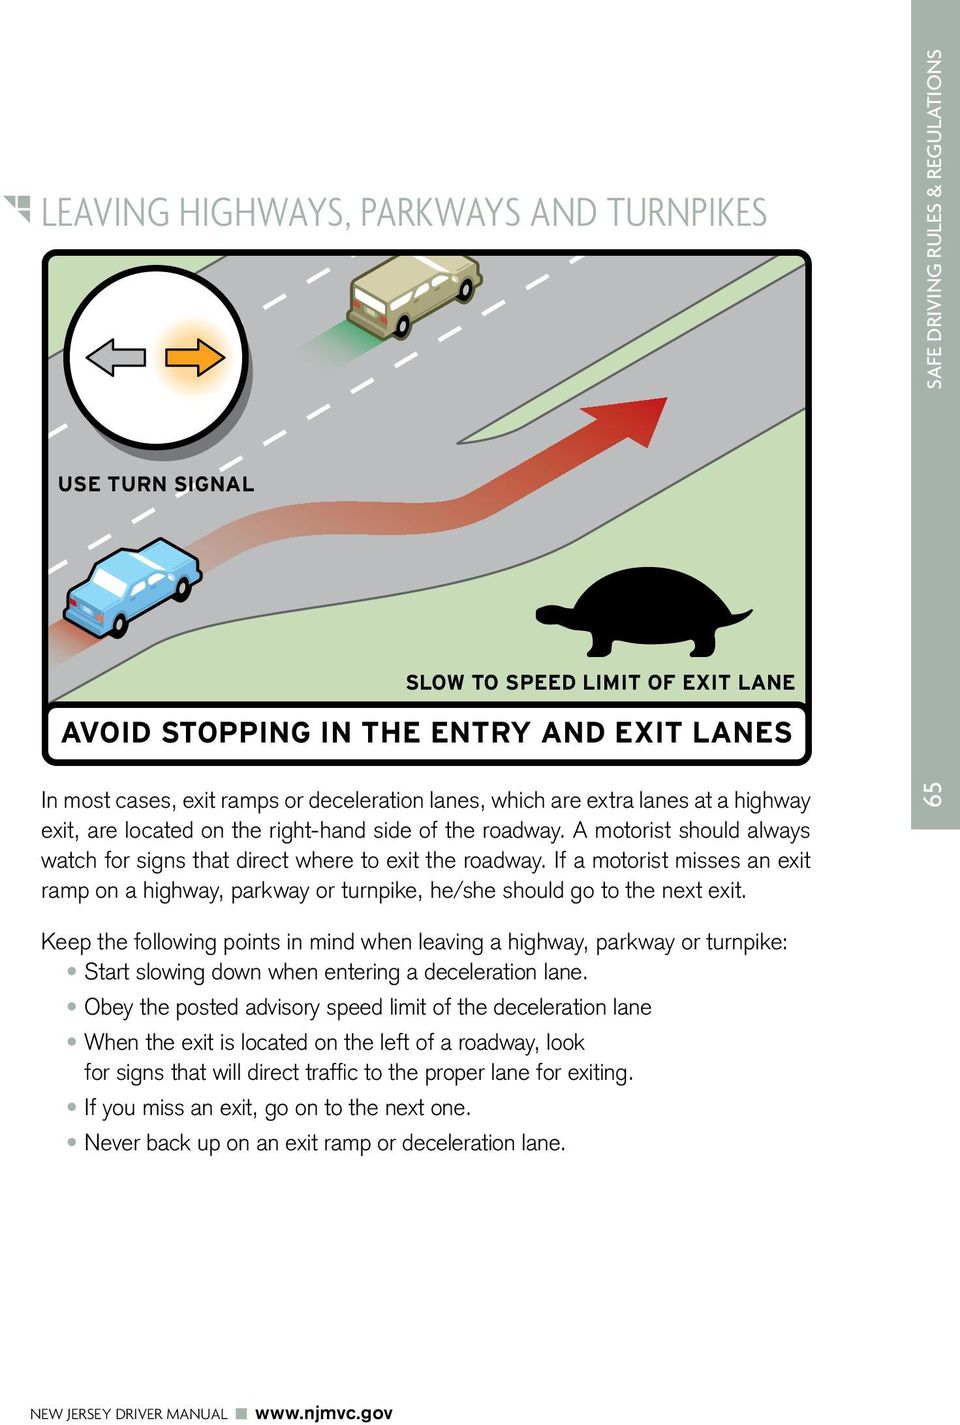 A motorist should always watch for signs that direct where to exit the roadway. If a motorist misses an exit ramp on a highway, parkway or turnpike, he/she should go to the next exit.